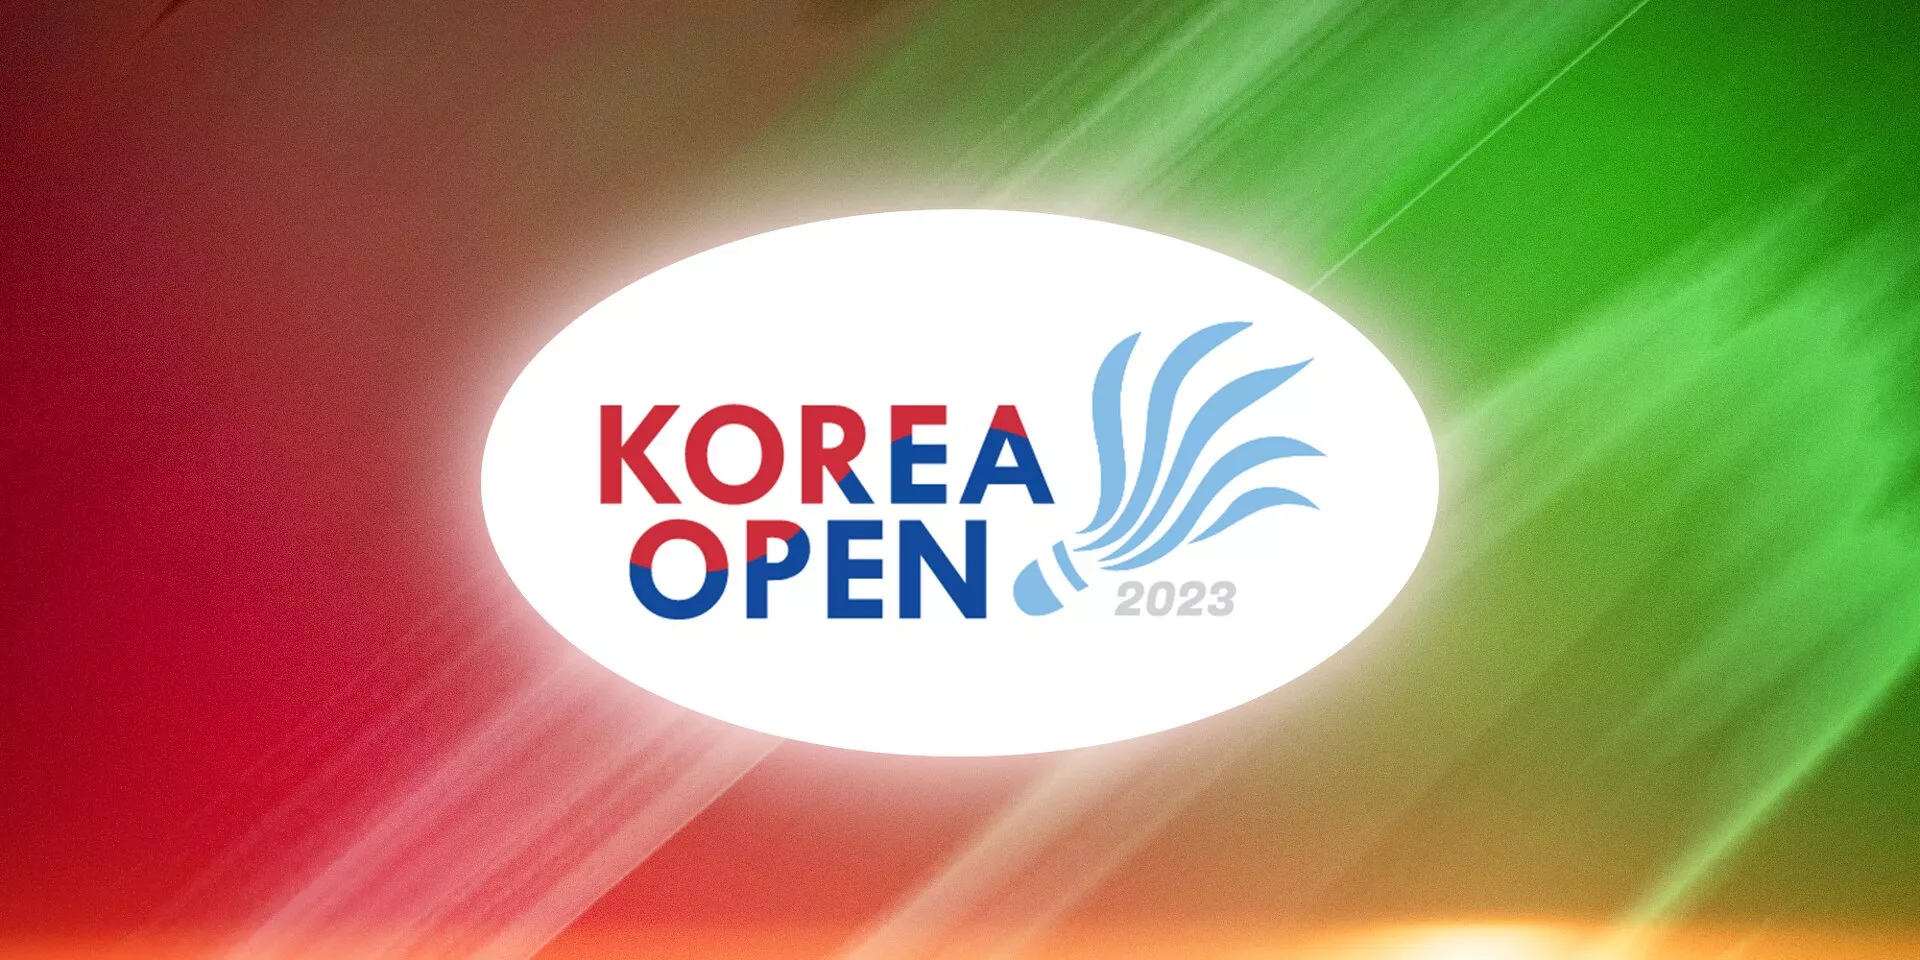 Where and how to watch Korea Open 2023 in Singapore?